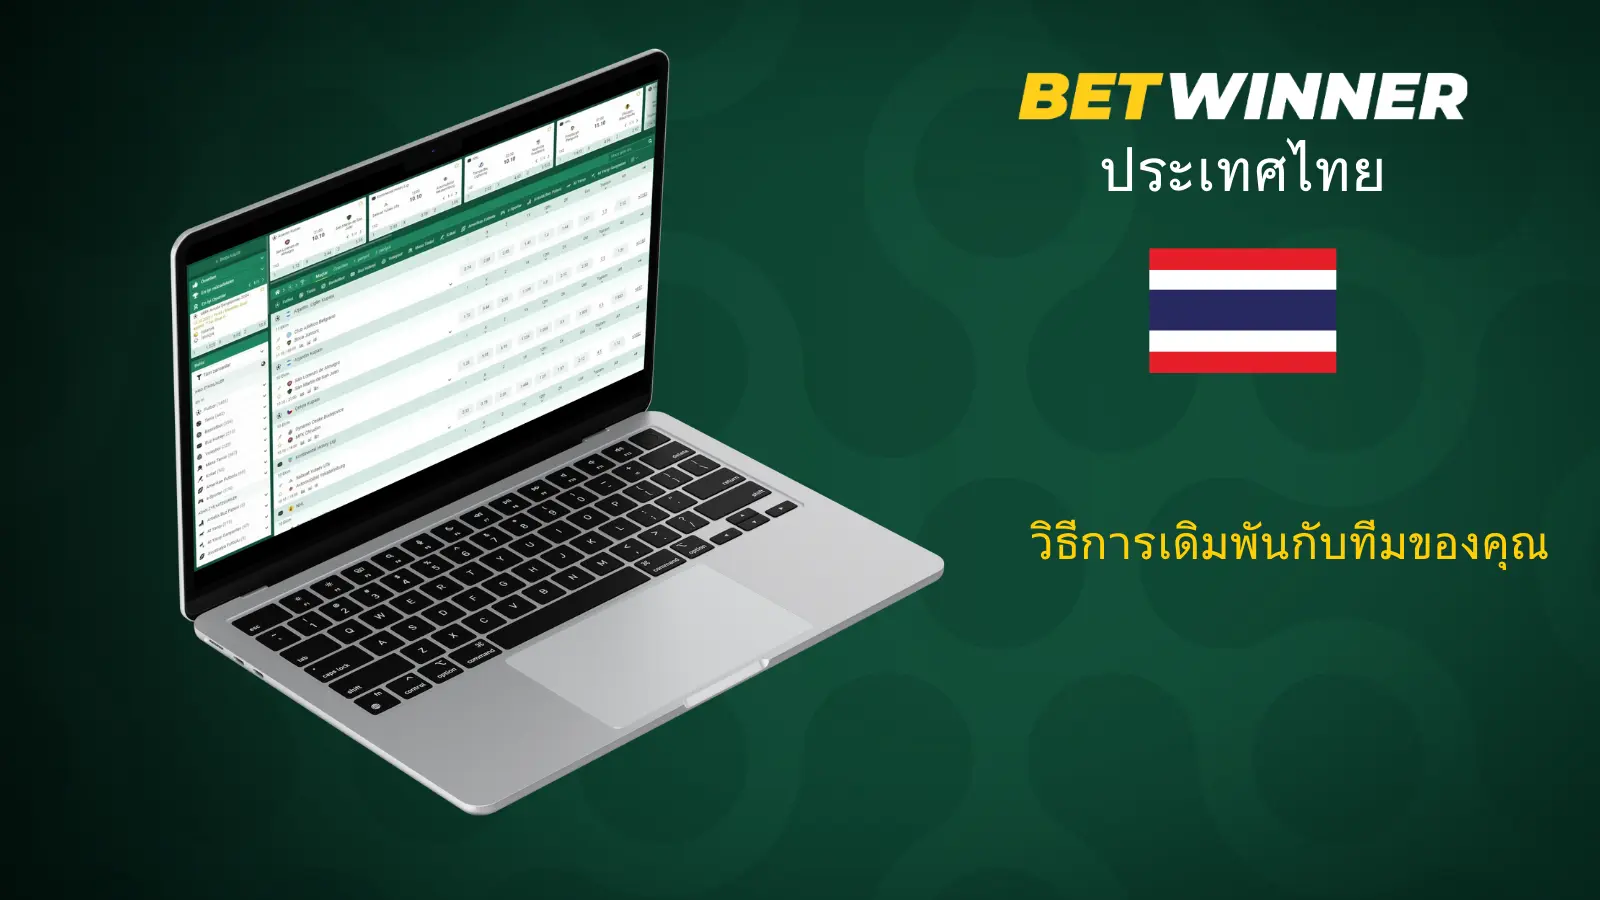 betwinner app Report: Statistics and Facts